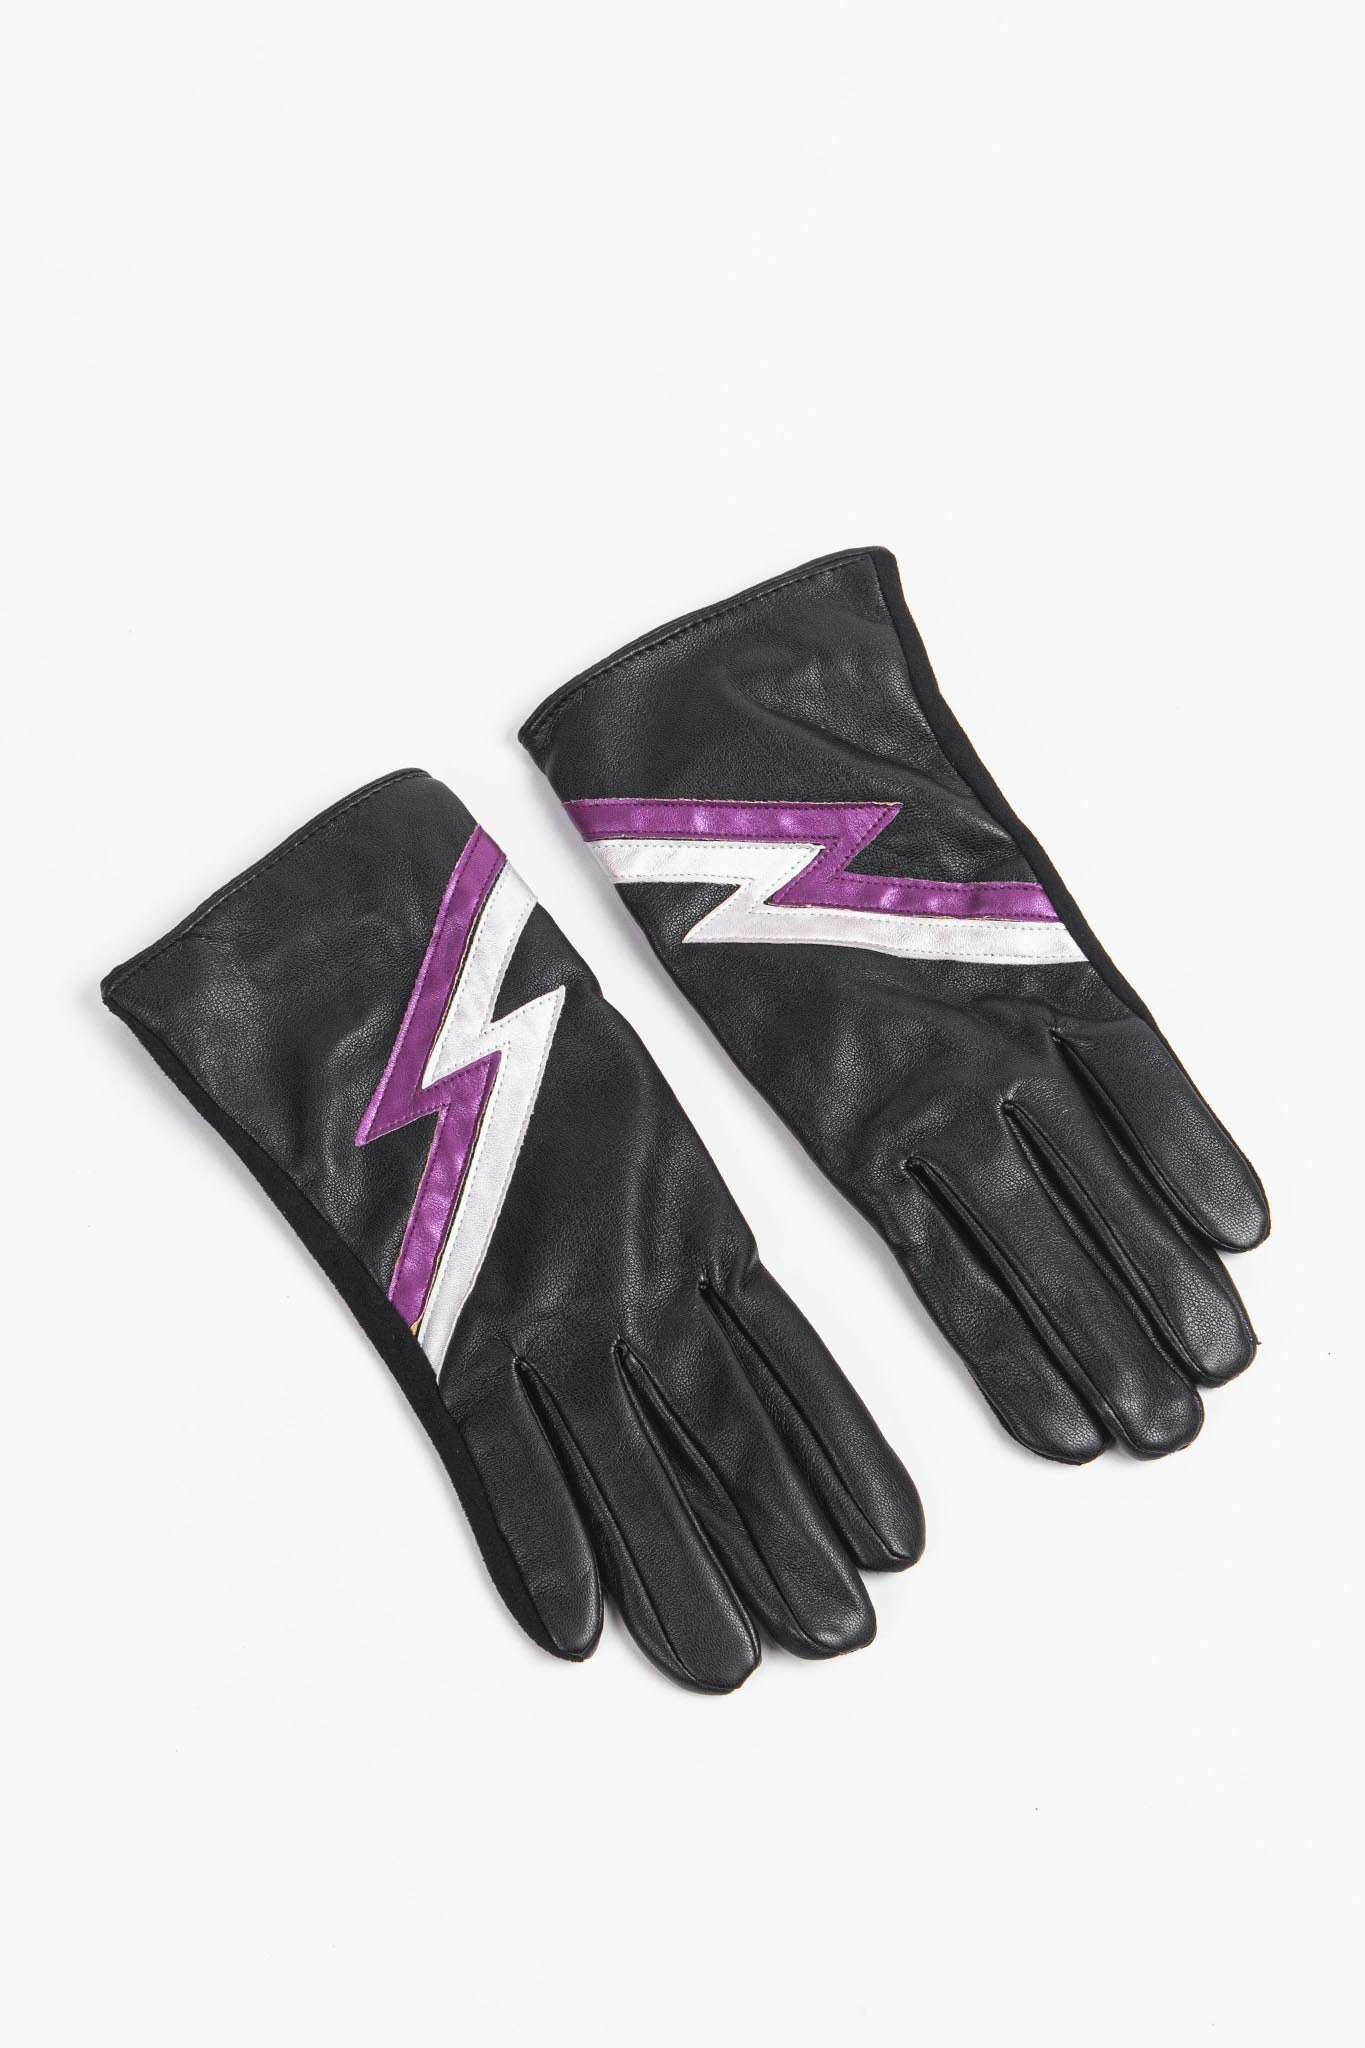 vegan leather gloves with a lighting bolt pattern on the back 